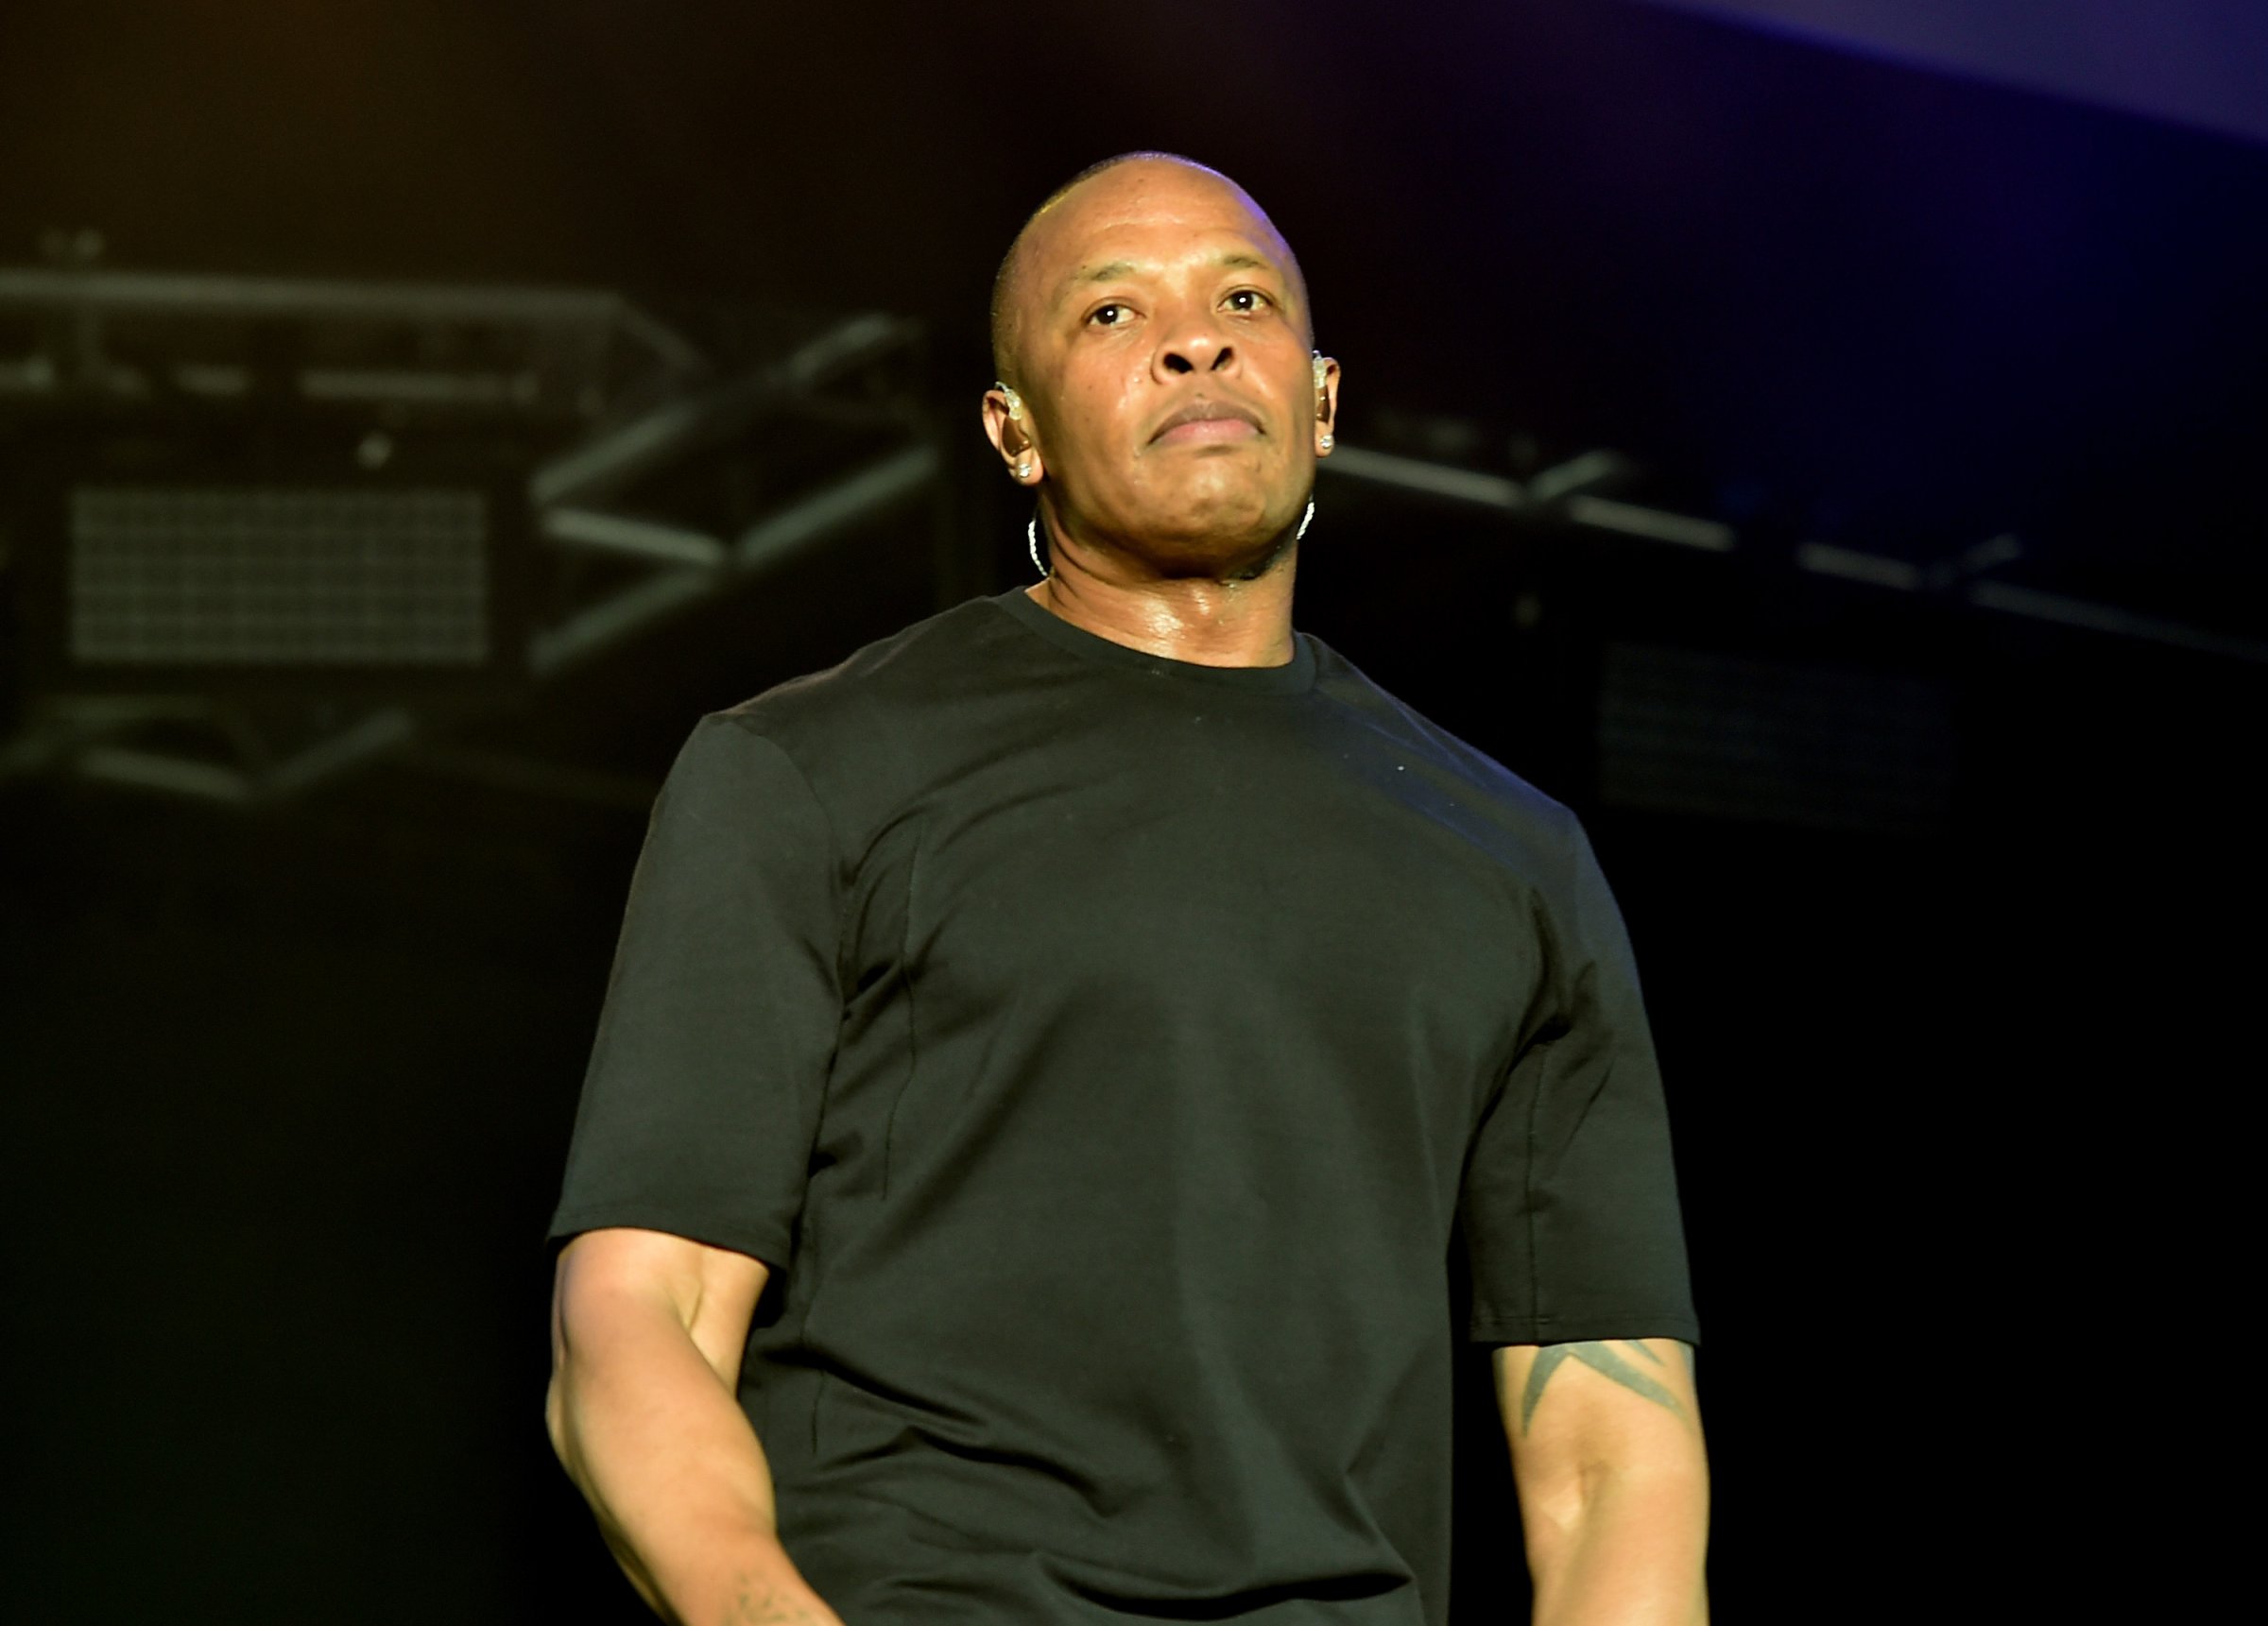 Recording artist Dr. Dre performs onstage during day 2 of the 2016 Coachella Valley Music & Arts Festival Weekend 2 at the Empire Polo Club on April 23, 2016 in Indio, California.